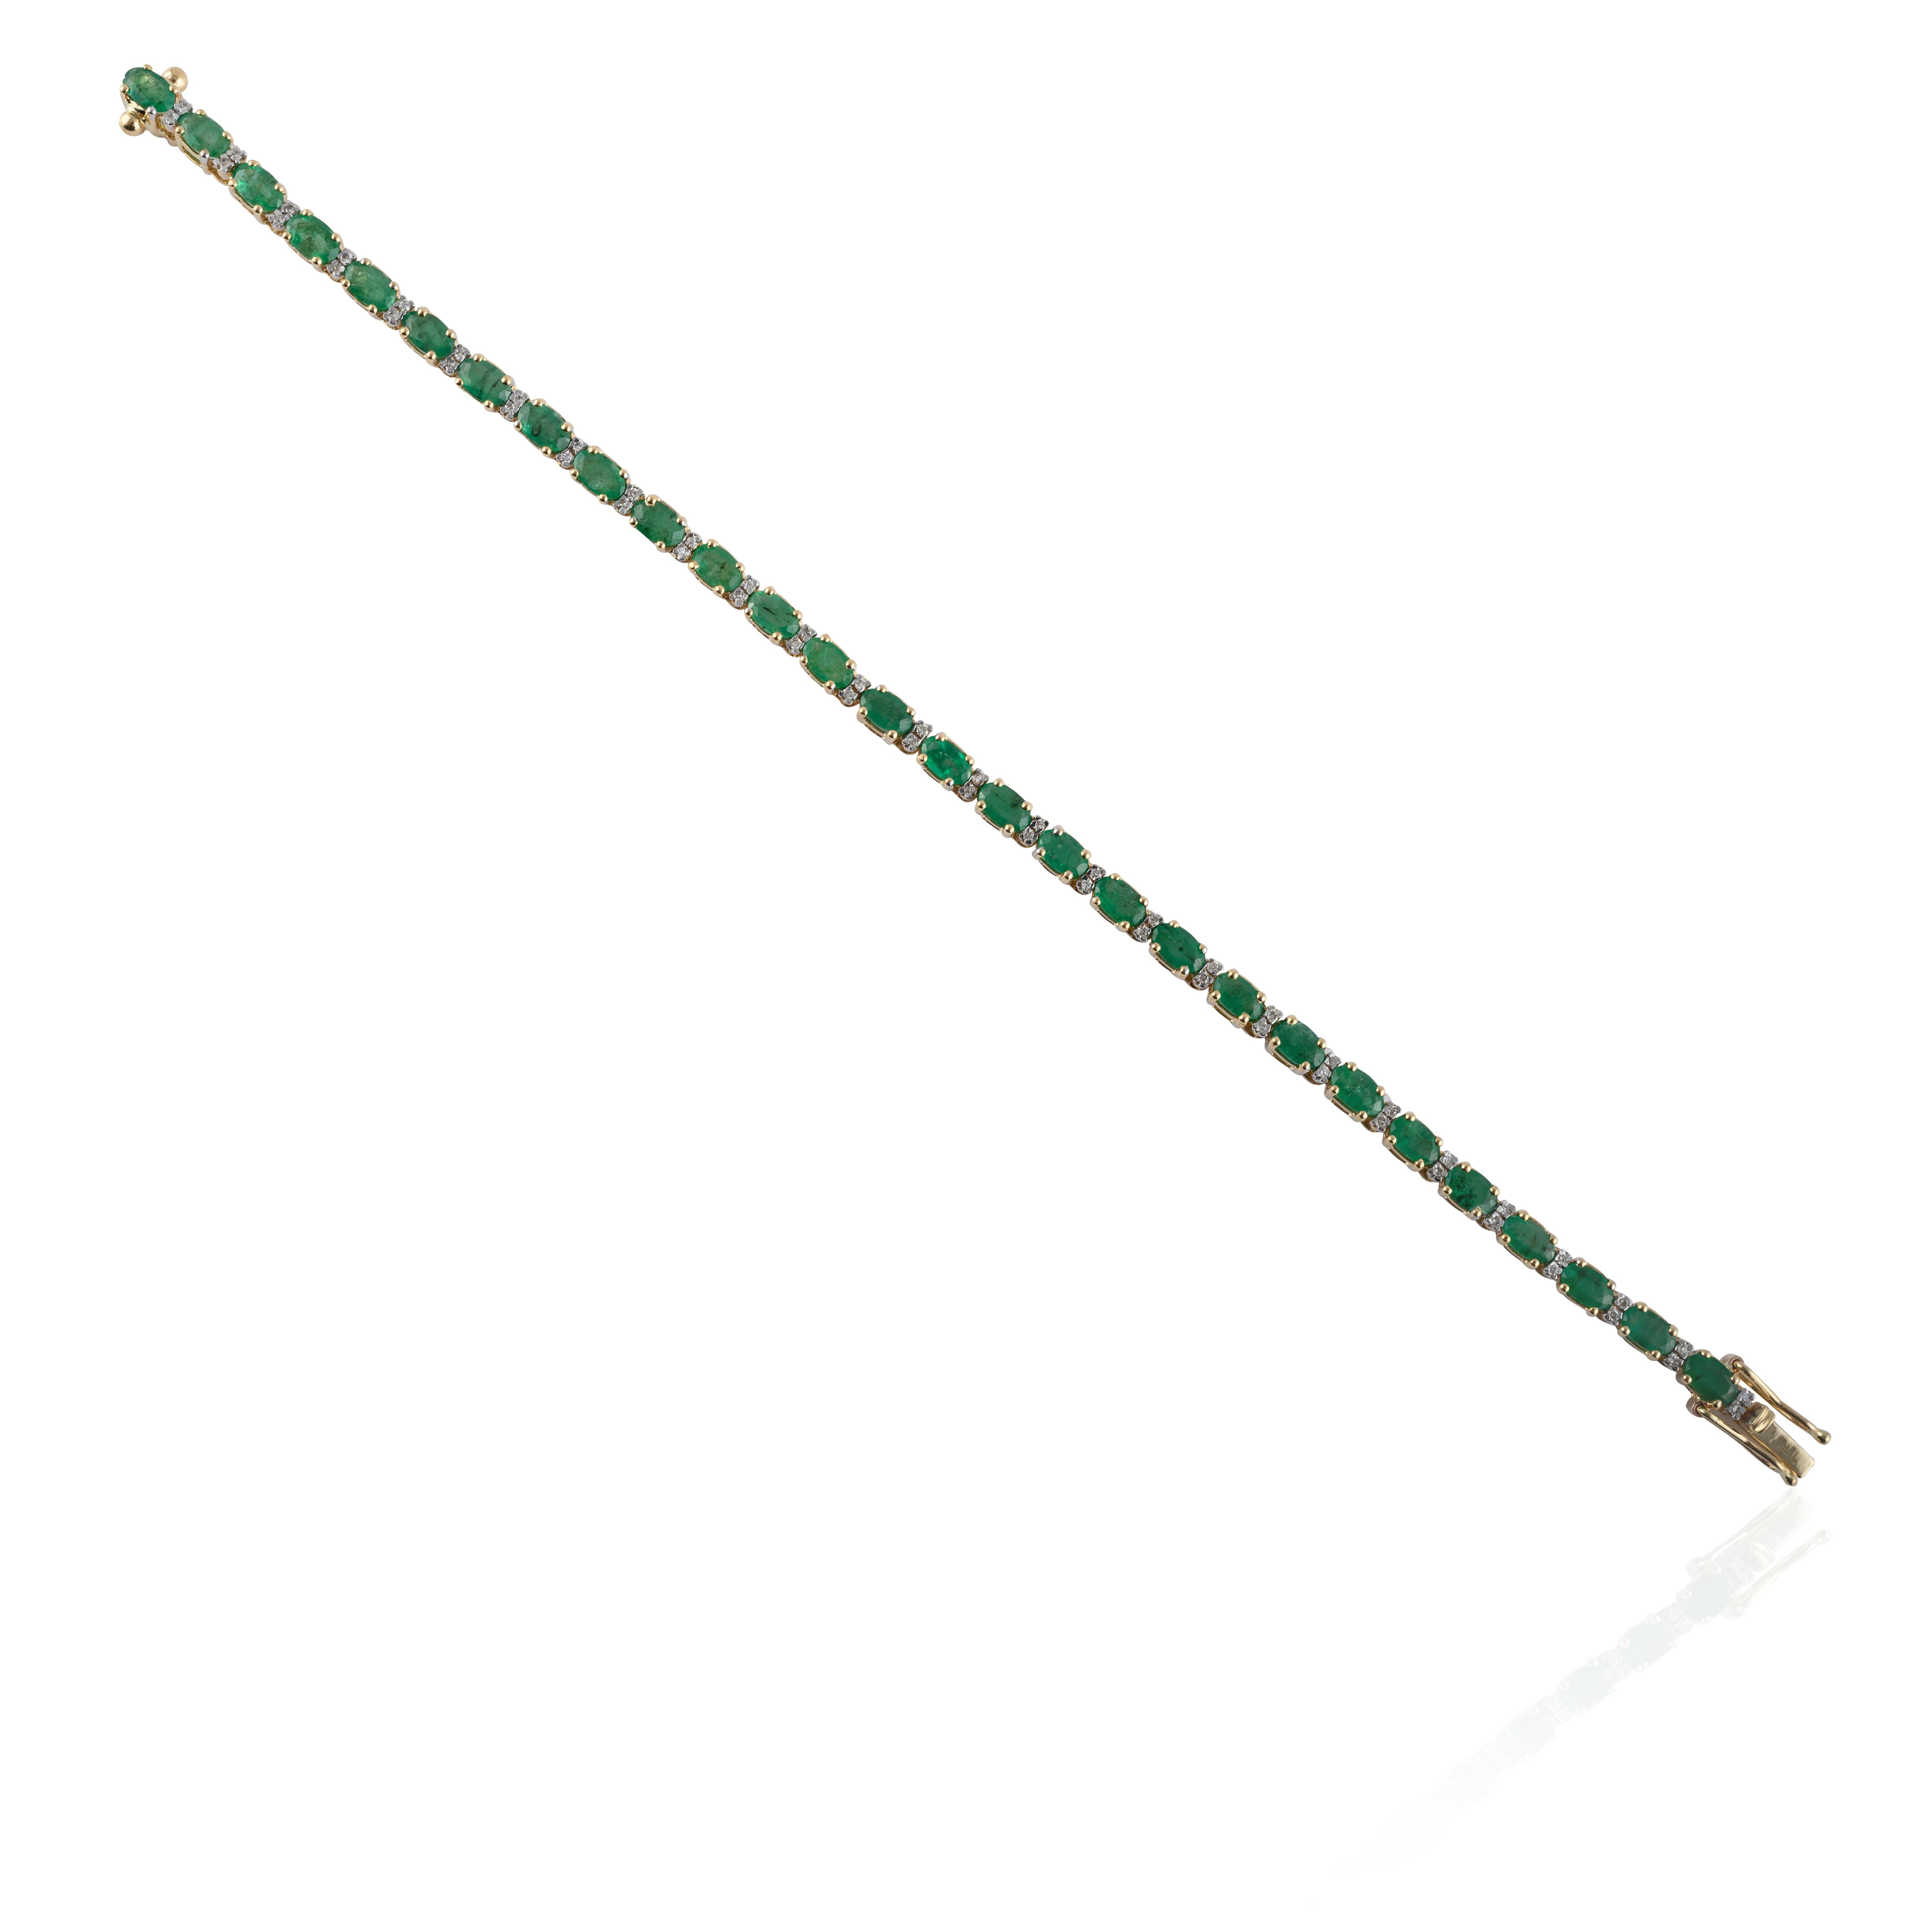 This Glorious Emerald Diamond Tennis Bracelet in 14K gold showcases 28 endlessly sparkling natural emerald, weighing 6.01 carat. It measures 7 inches long in length. 
Emerald enhances intellectual capacity of the person.
Designed with perfect oval